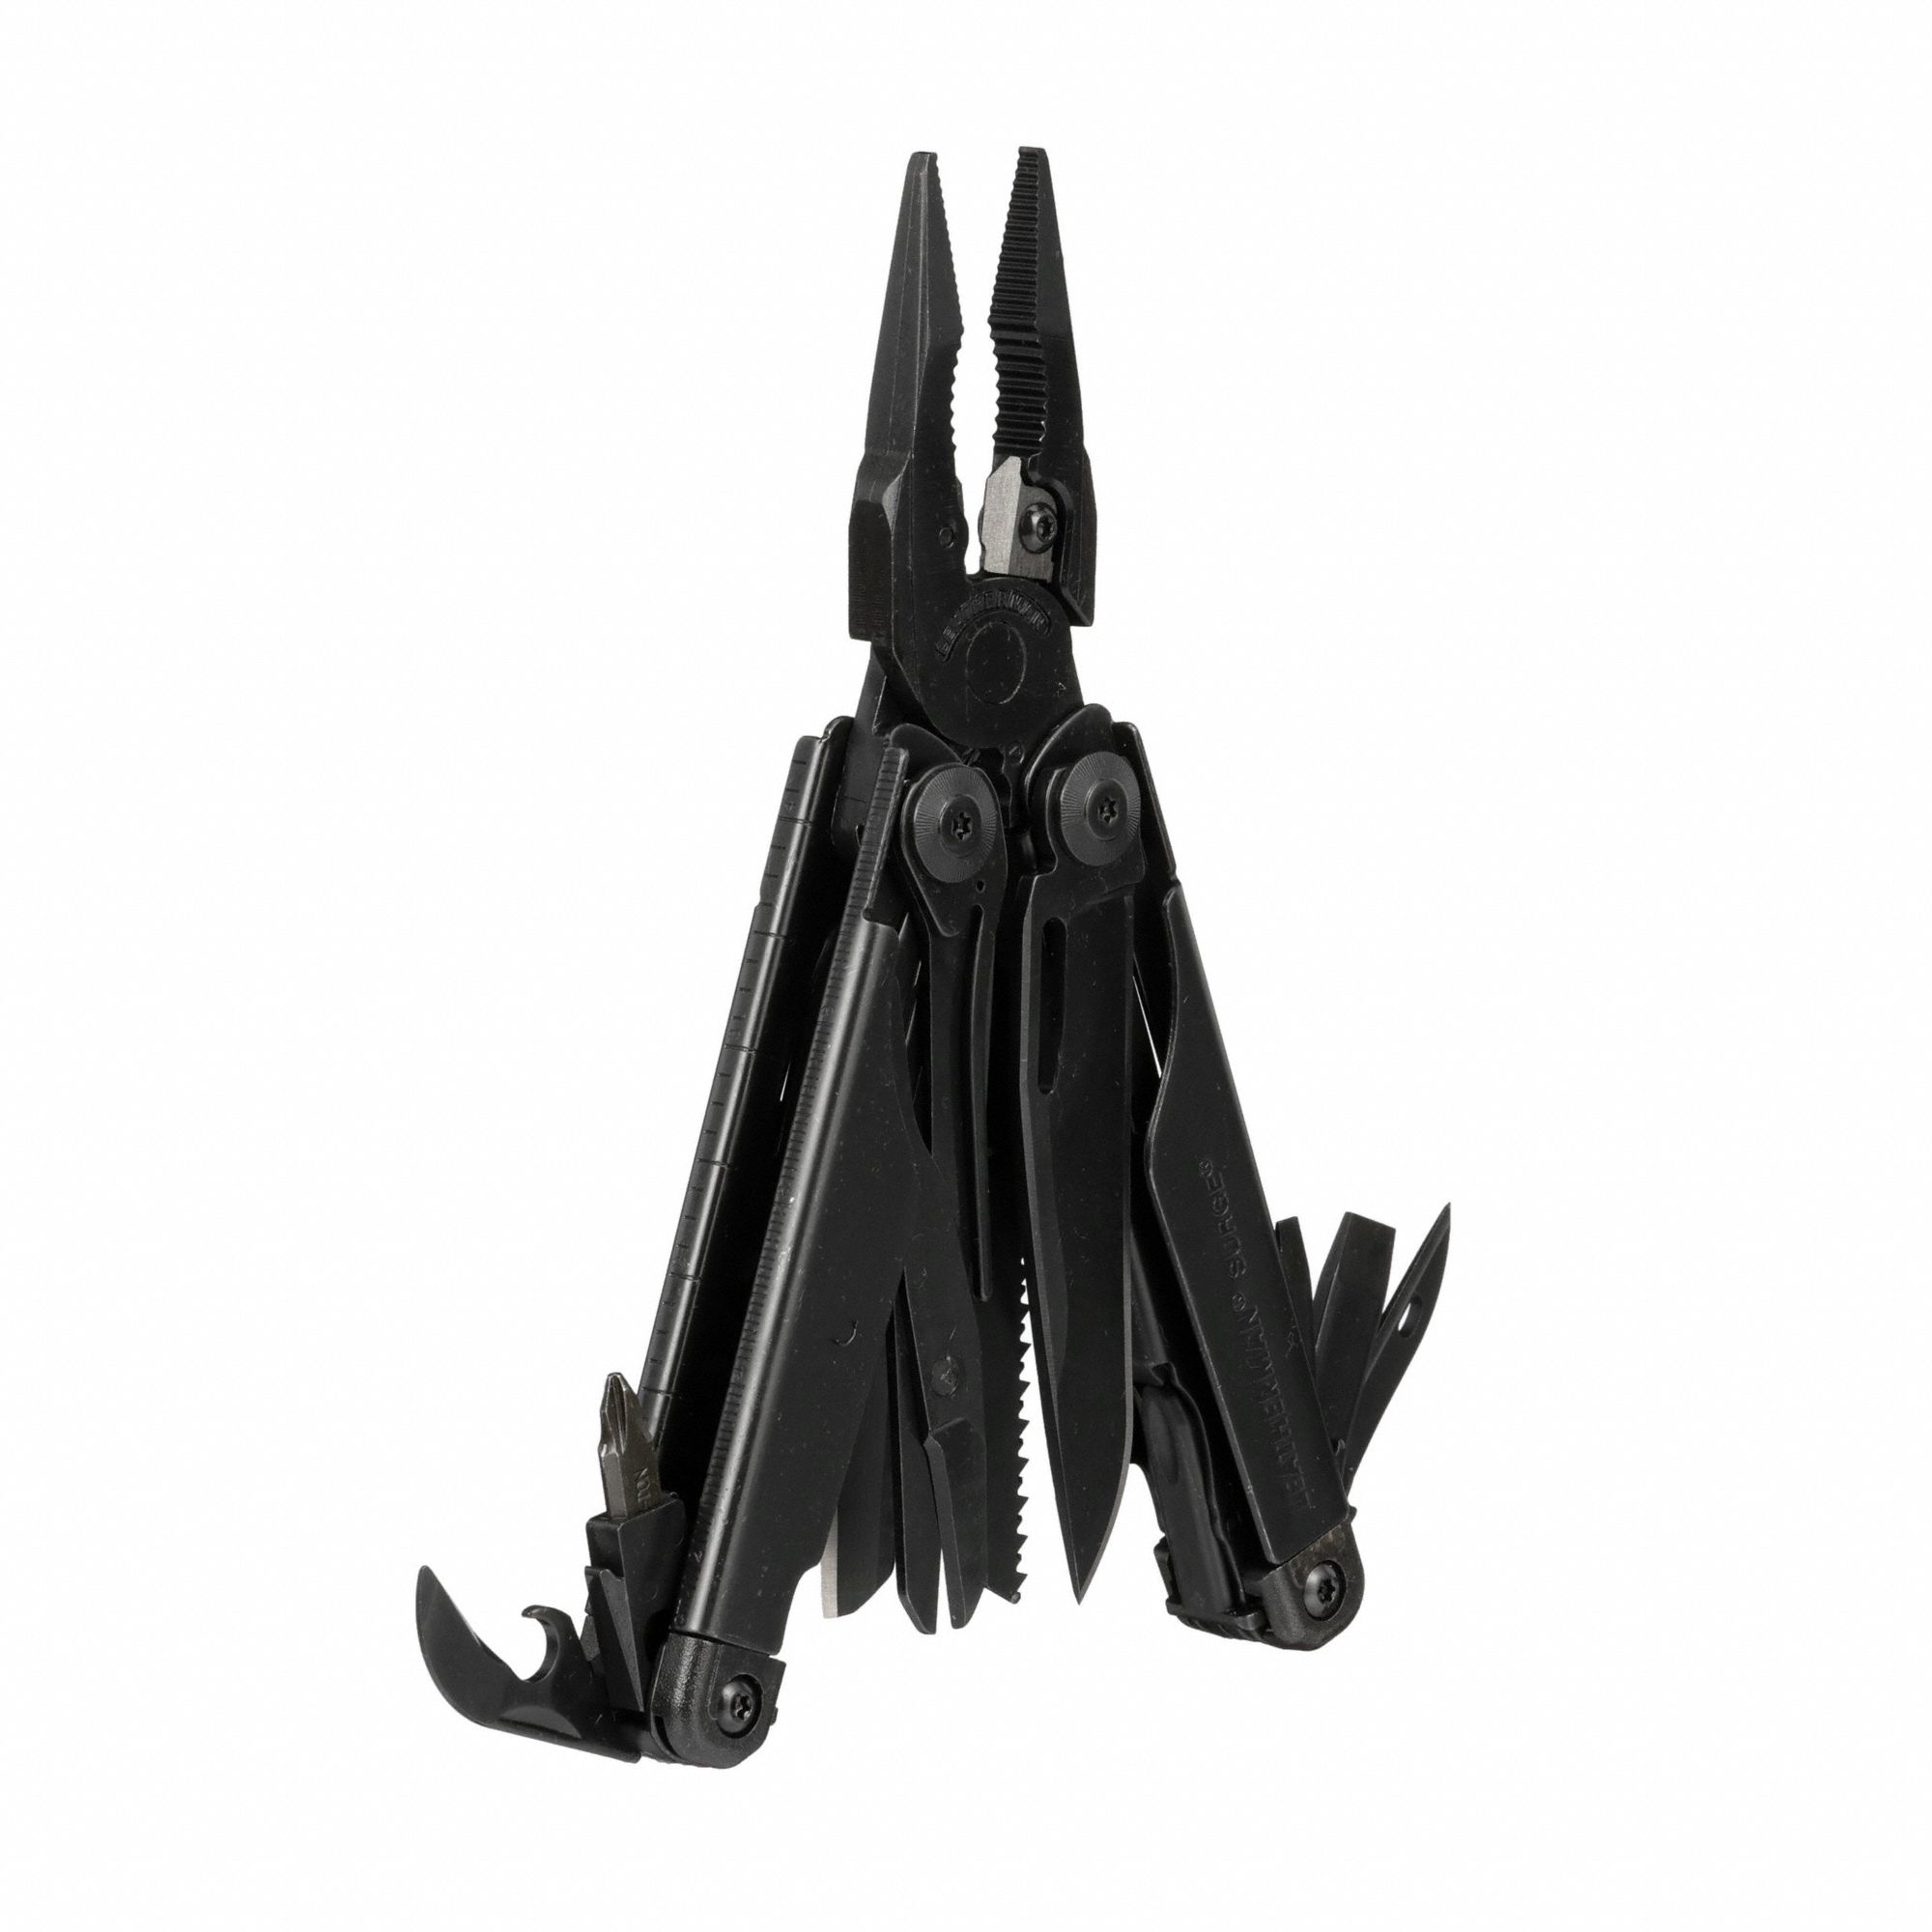 Leatherman SURGE - 830278A MULTI-TOOLS AND KNIVES